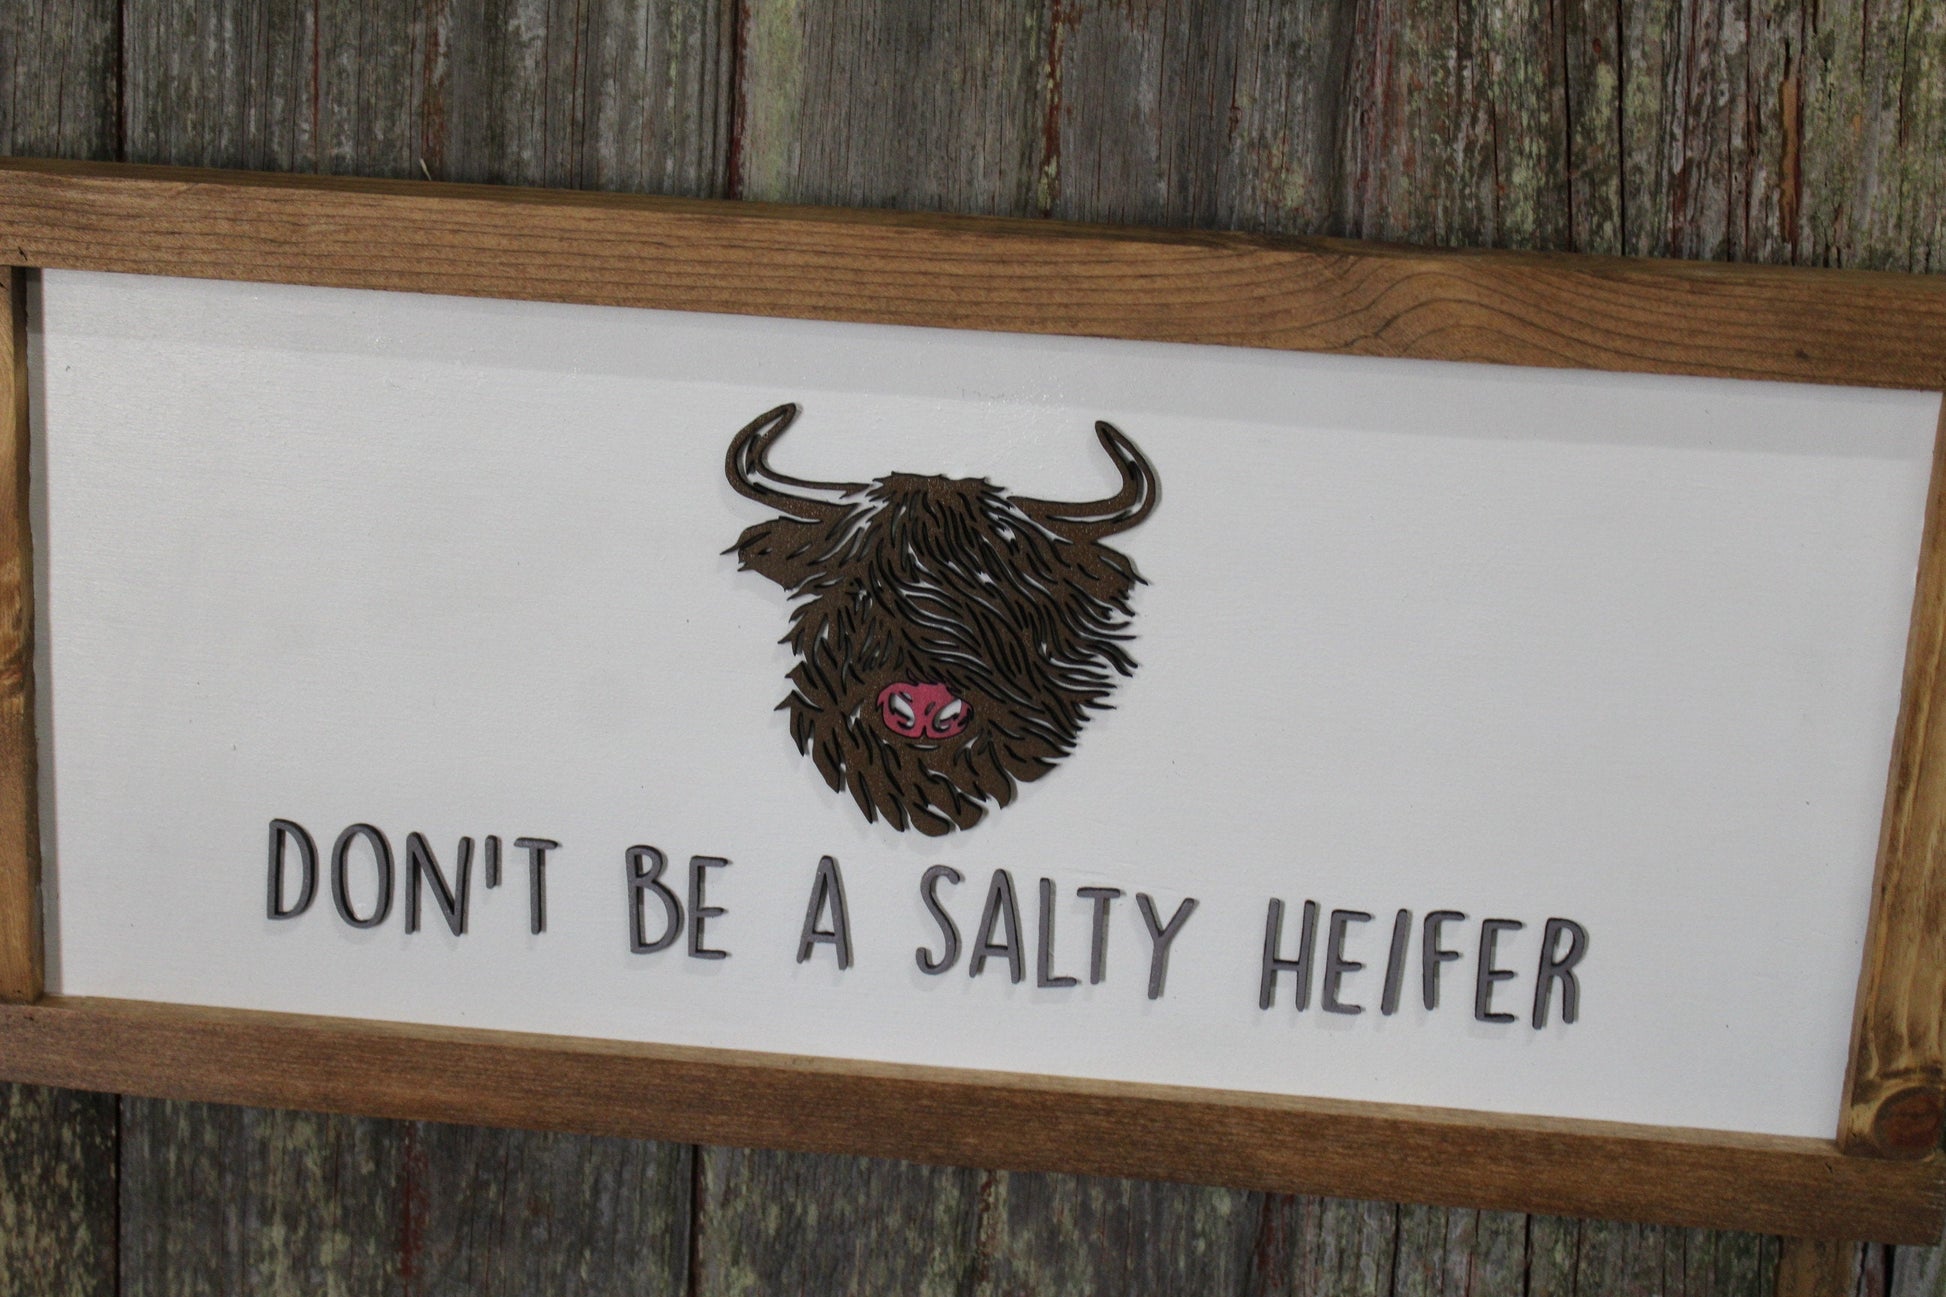 Don't be a Salty Heifer Cow Wood Sign Highland 3D Raised Text Image Long Hair Fuzzy Scottish Cow Farmhouse Handmade Sign Rustic Primitive